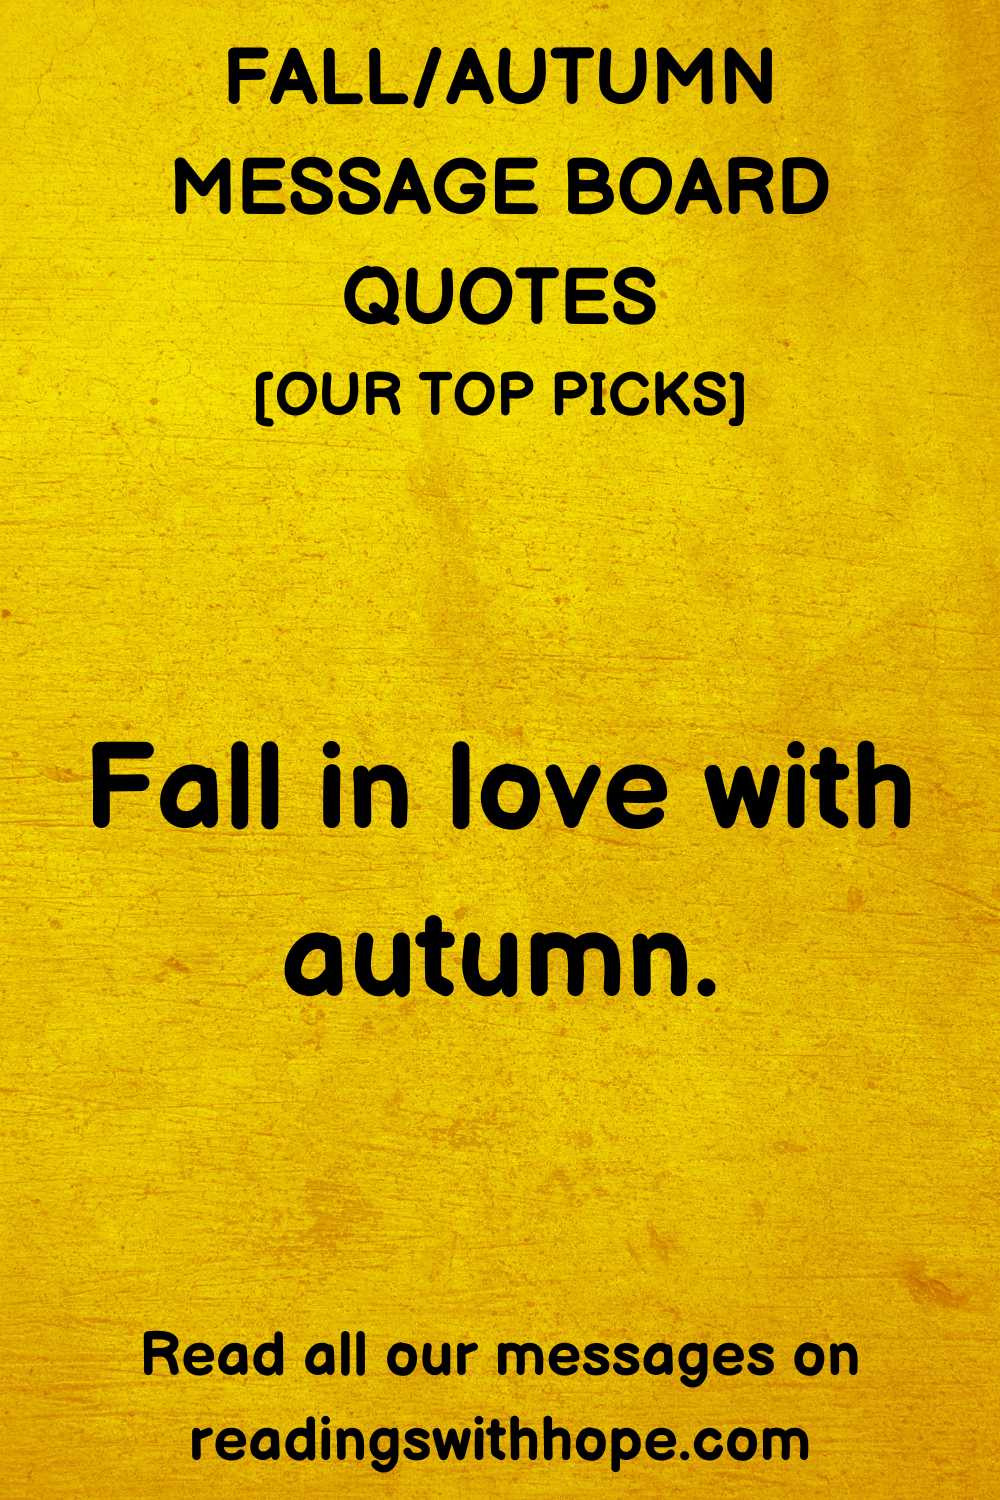 Fall/Autumn Message Board Quotes